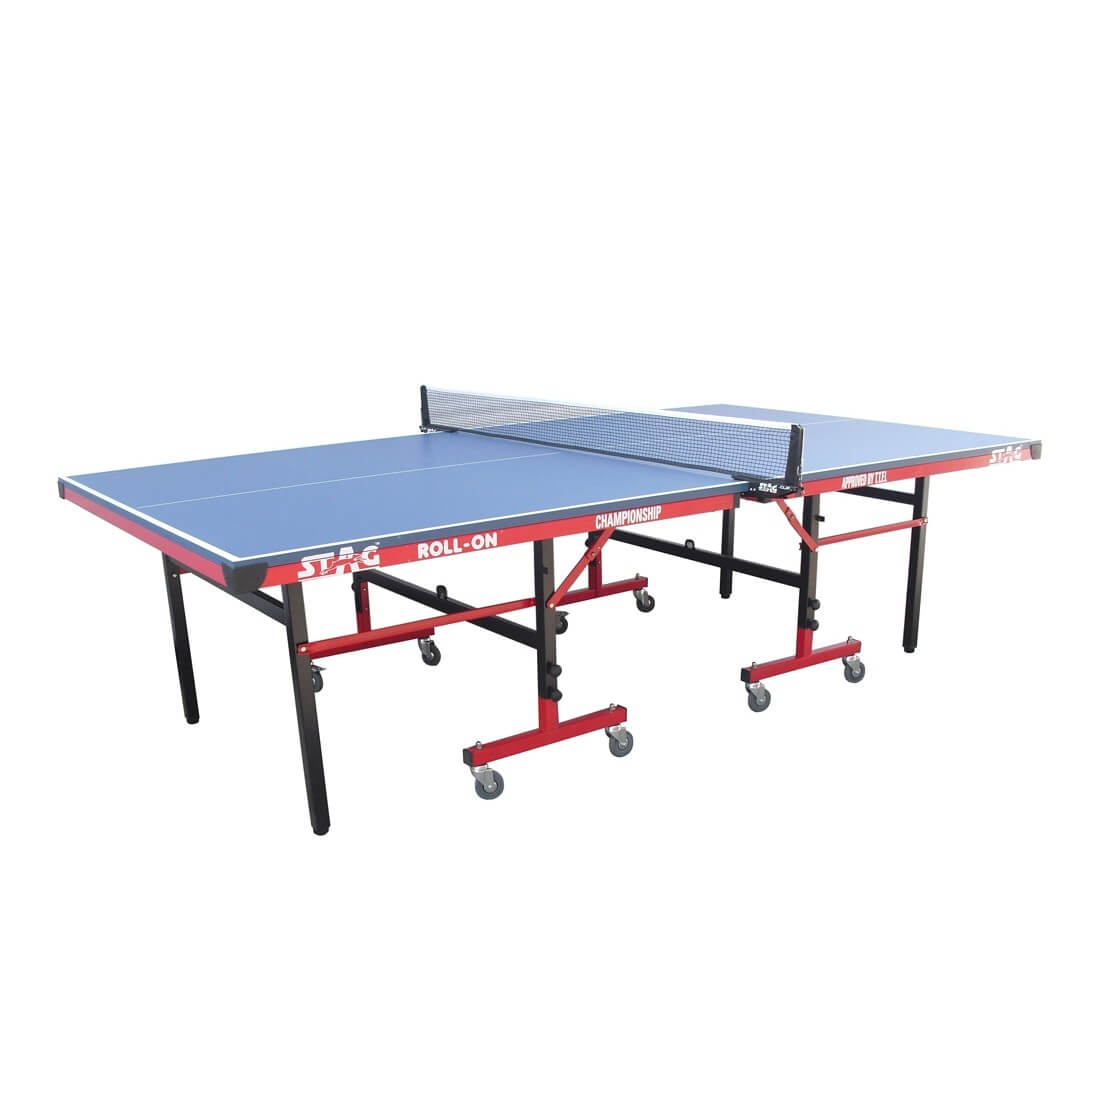 Stag Championship Table Tennis Table escapeauthority